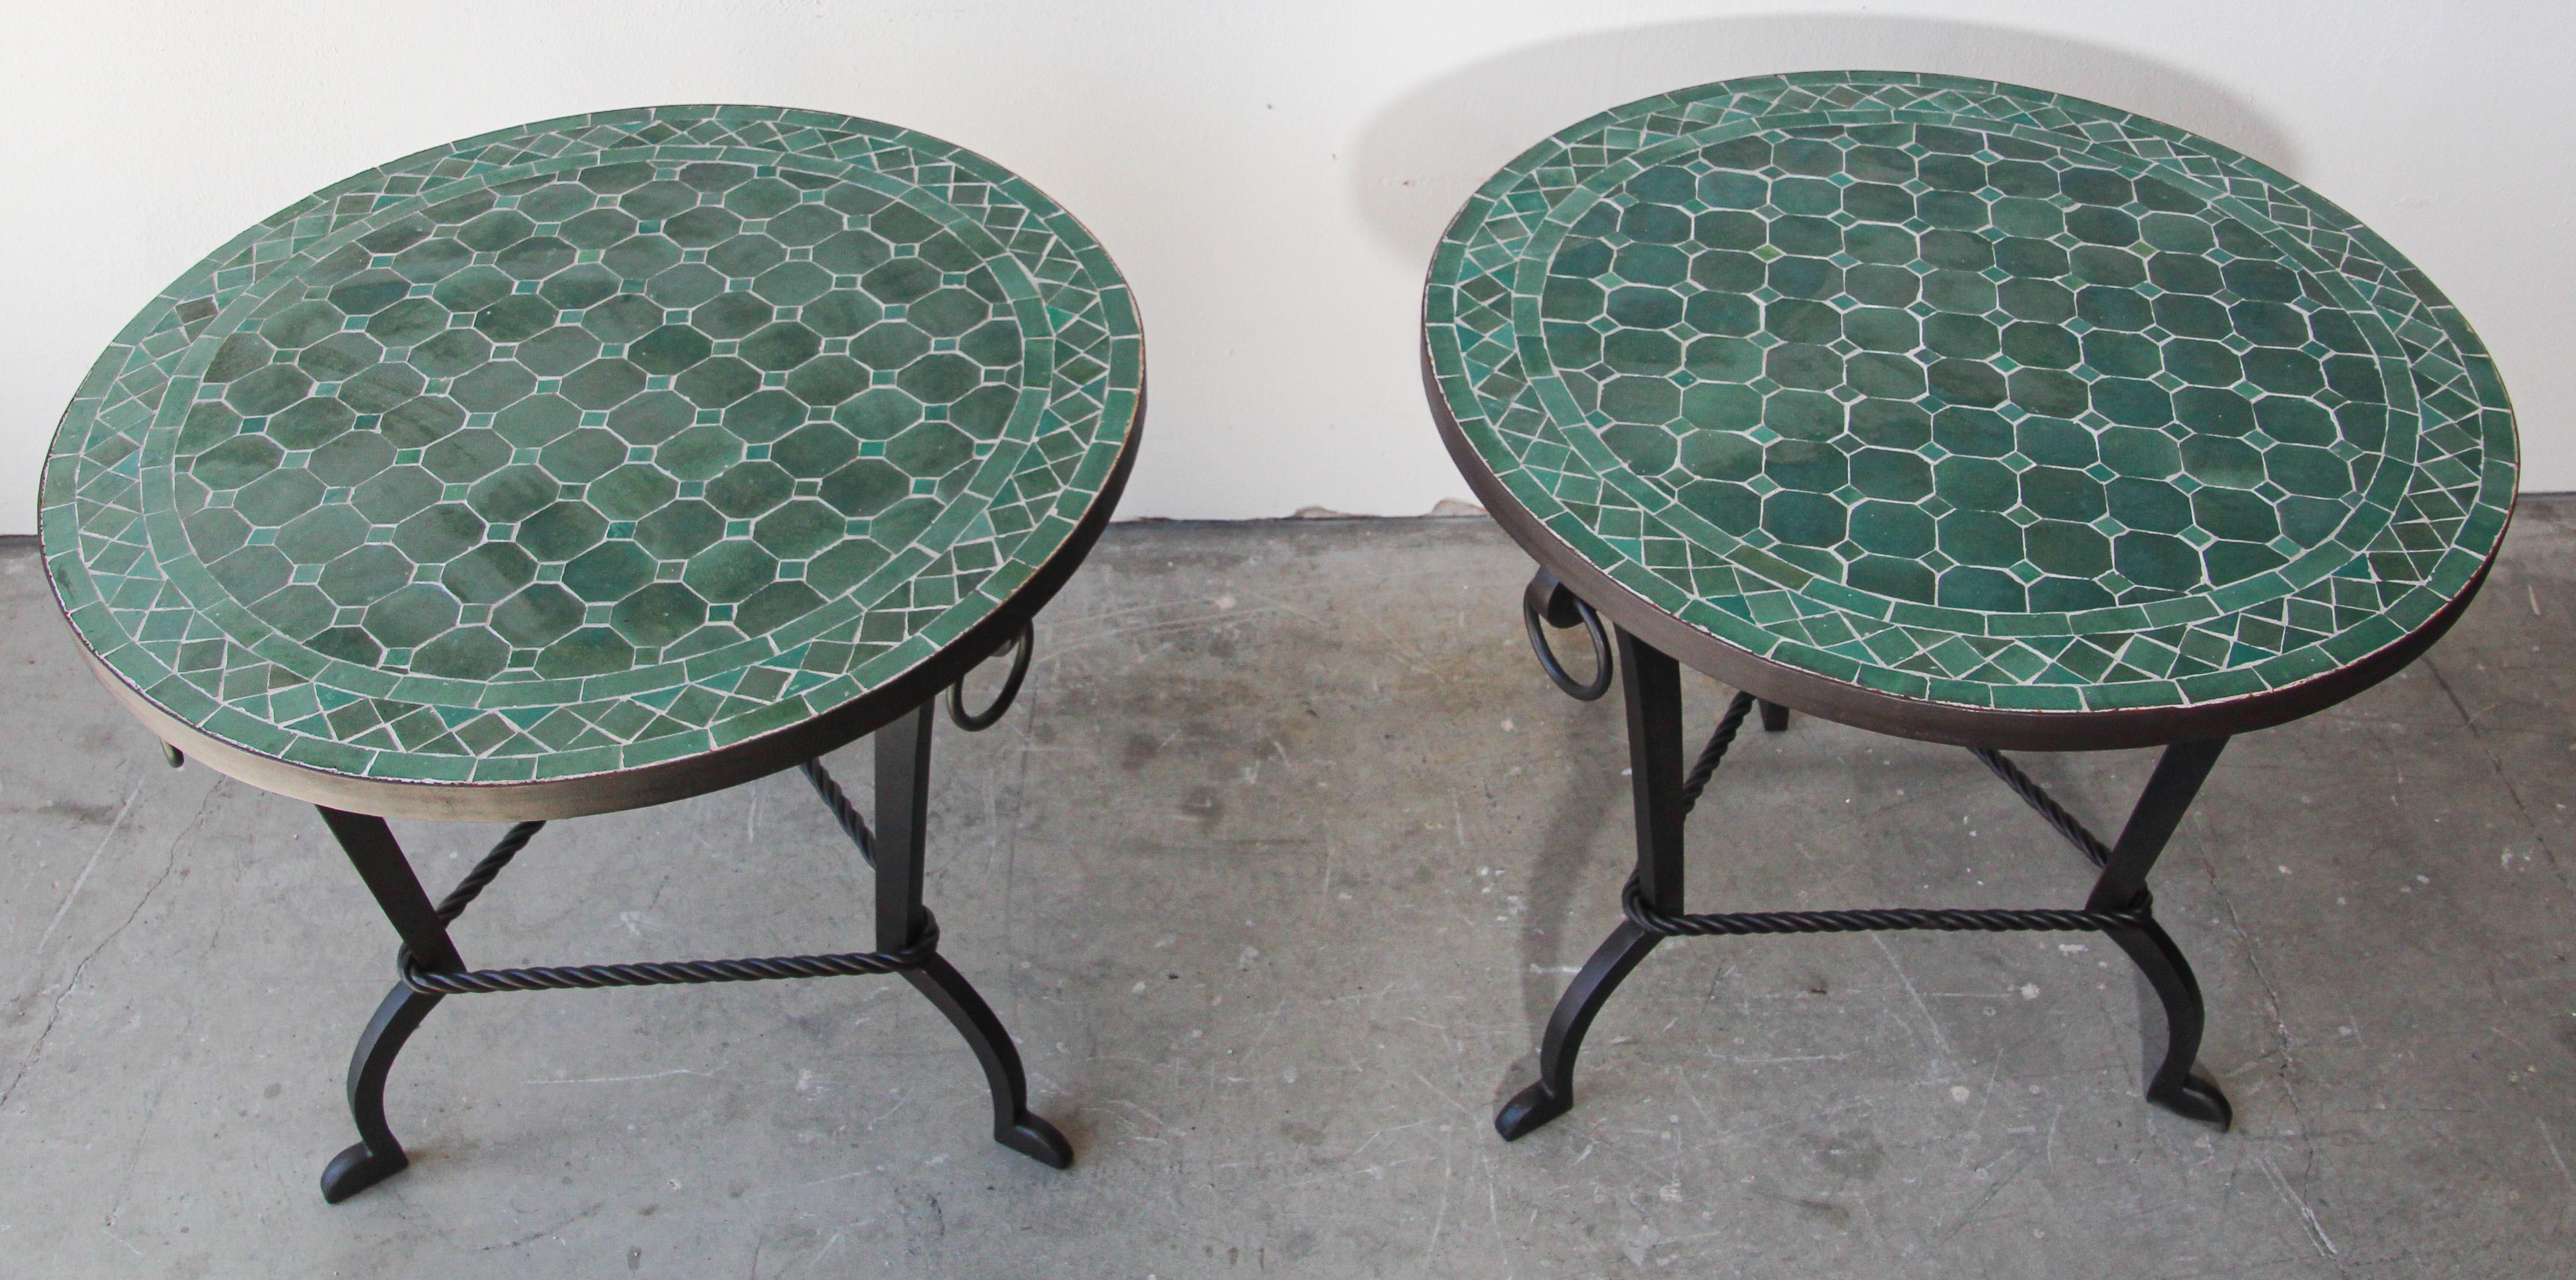 Pair of Moroccan Fez Mosaic Tile Tables in Emerald Green at 1stDibs ...